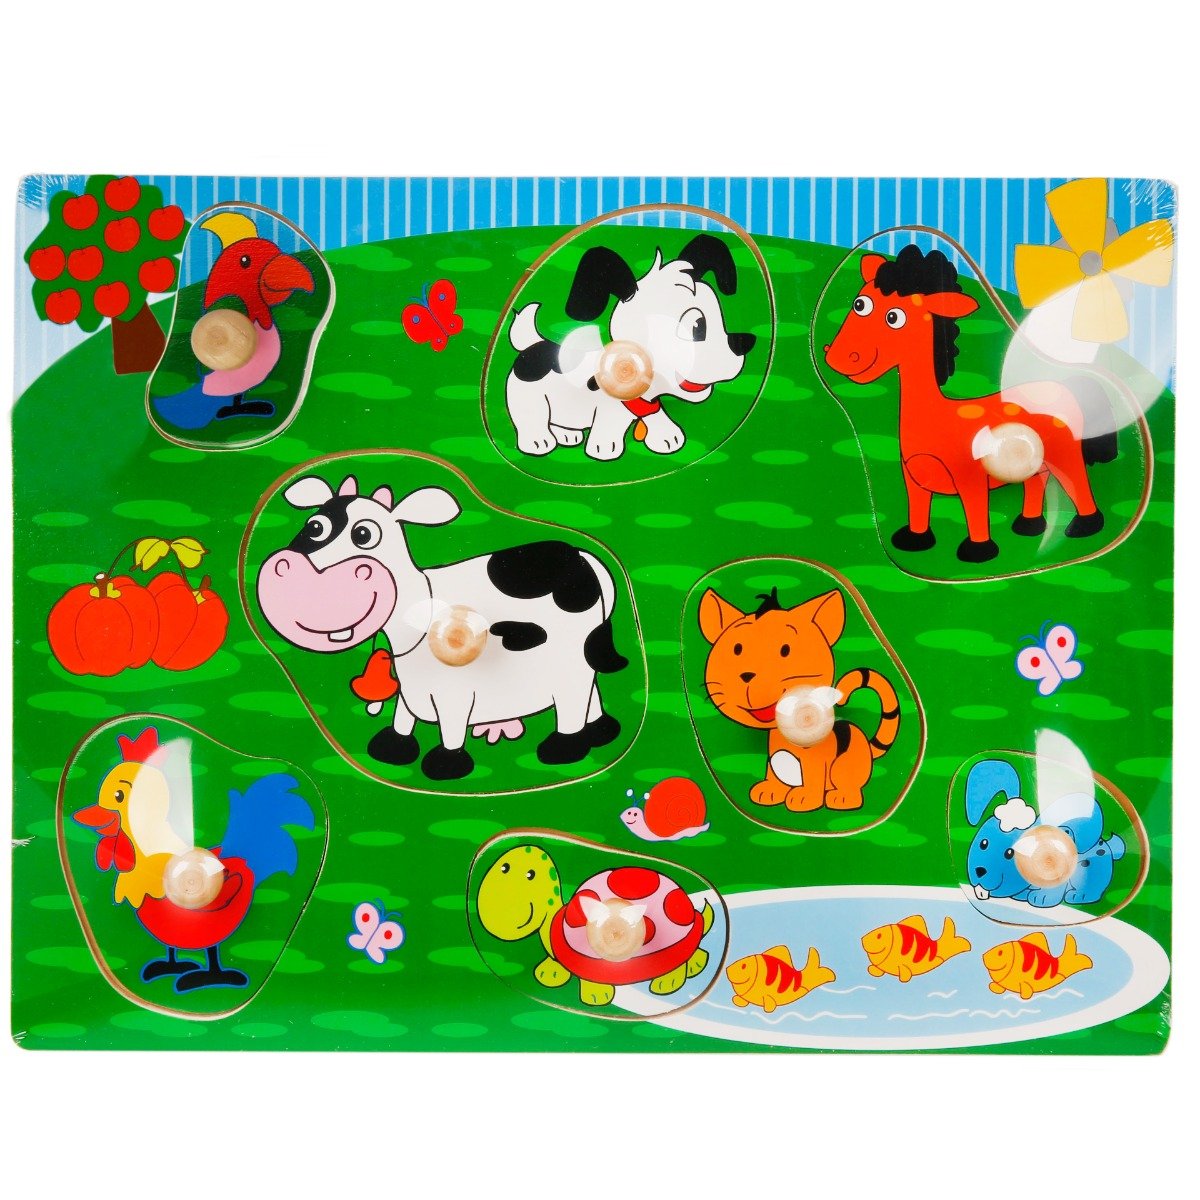 Puzzle din lemn, Woody, Animale domestice cu maner, 8 piese